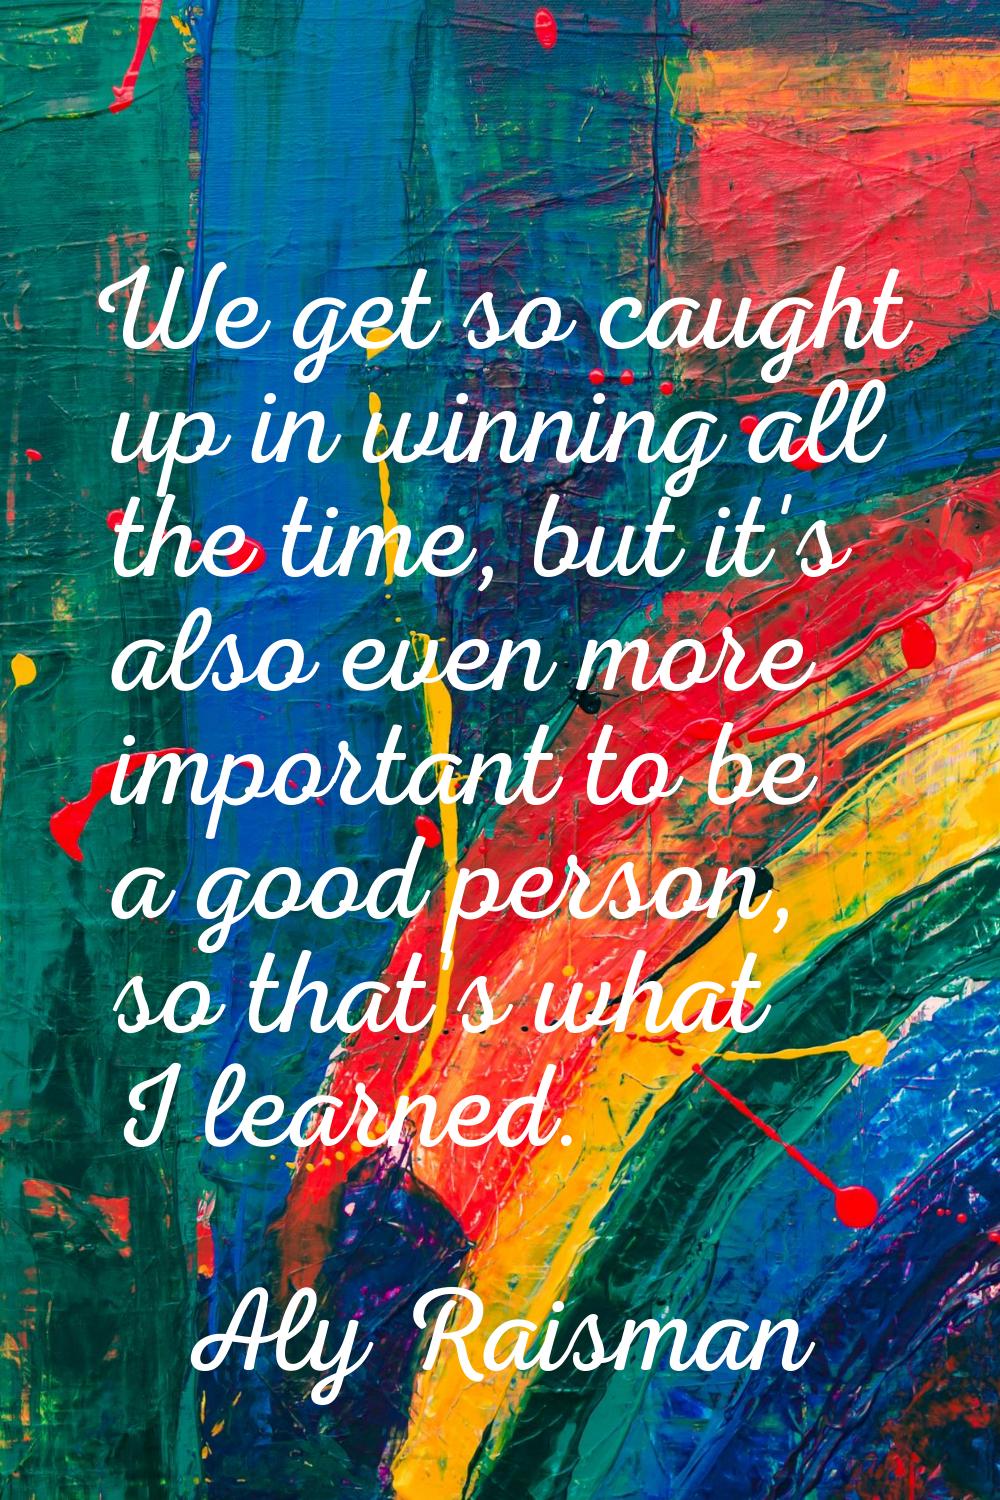 We get so caught up in winning all the time, but it's also even more important to be a good person,